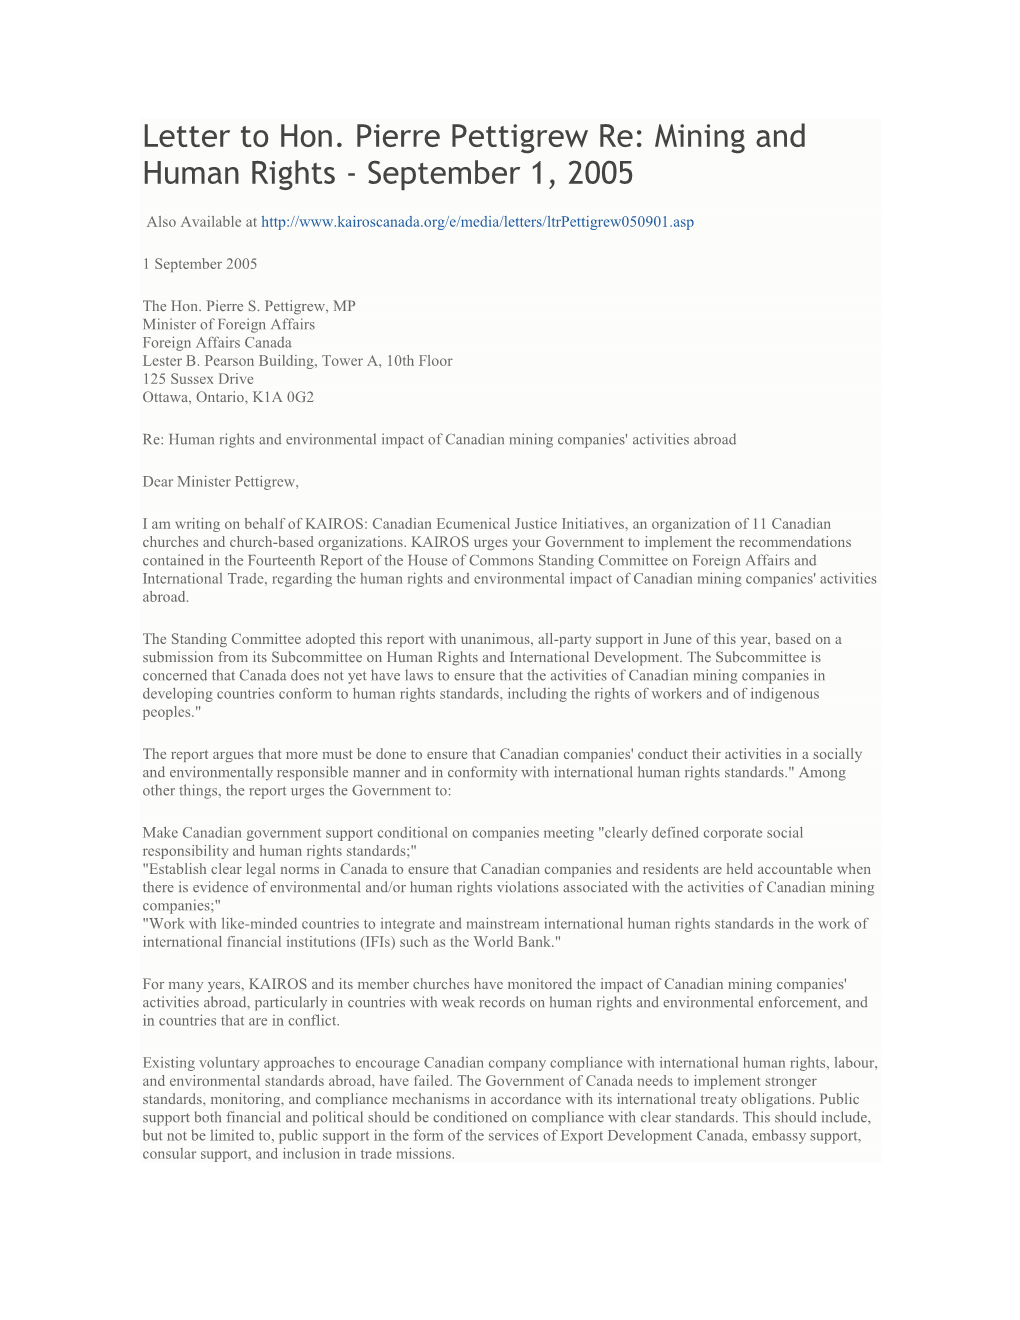 Letter to Hon. Pierre Pettigrew Re: Mining and Human Rights - September 1, 2005